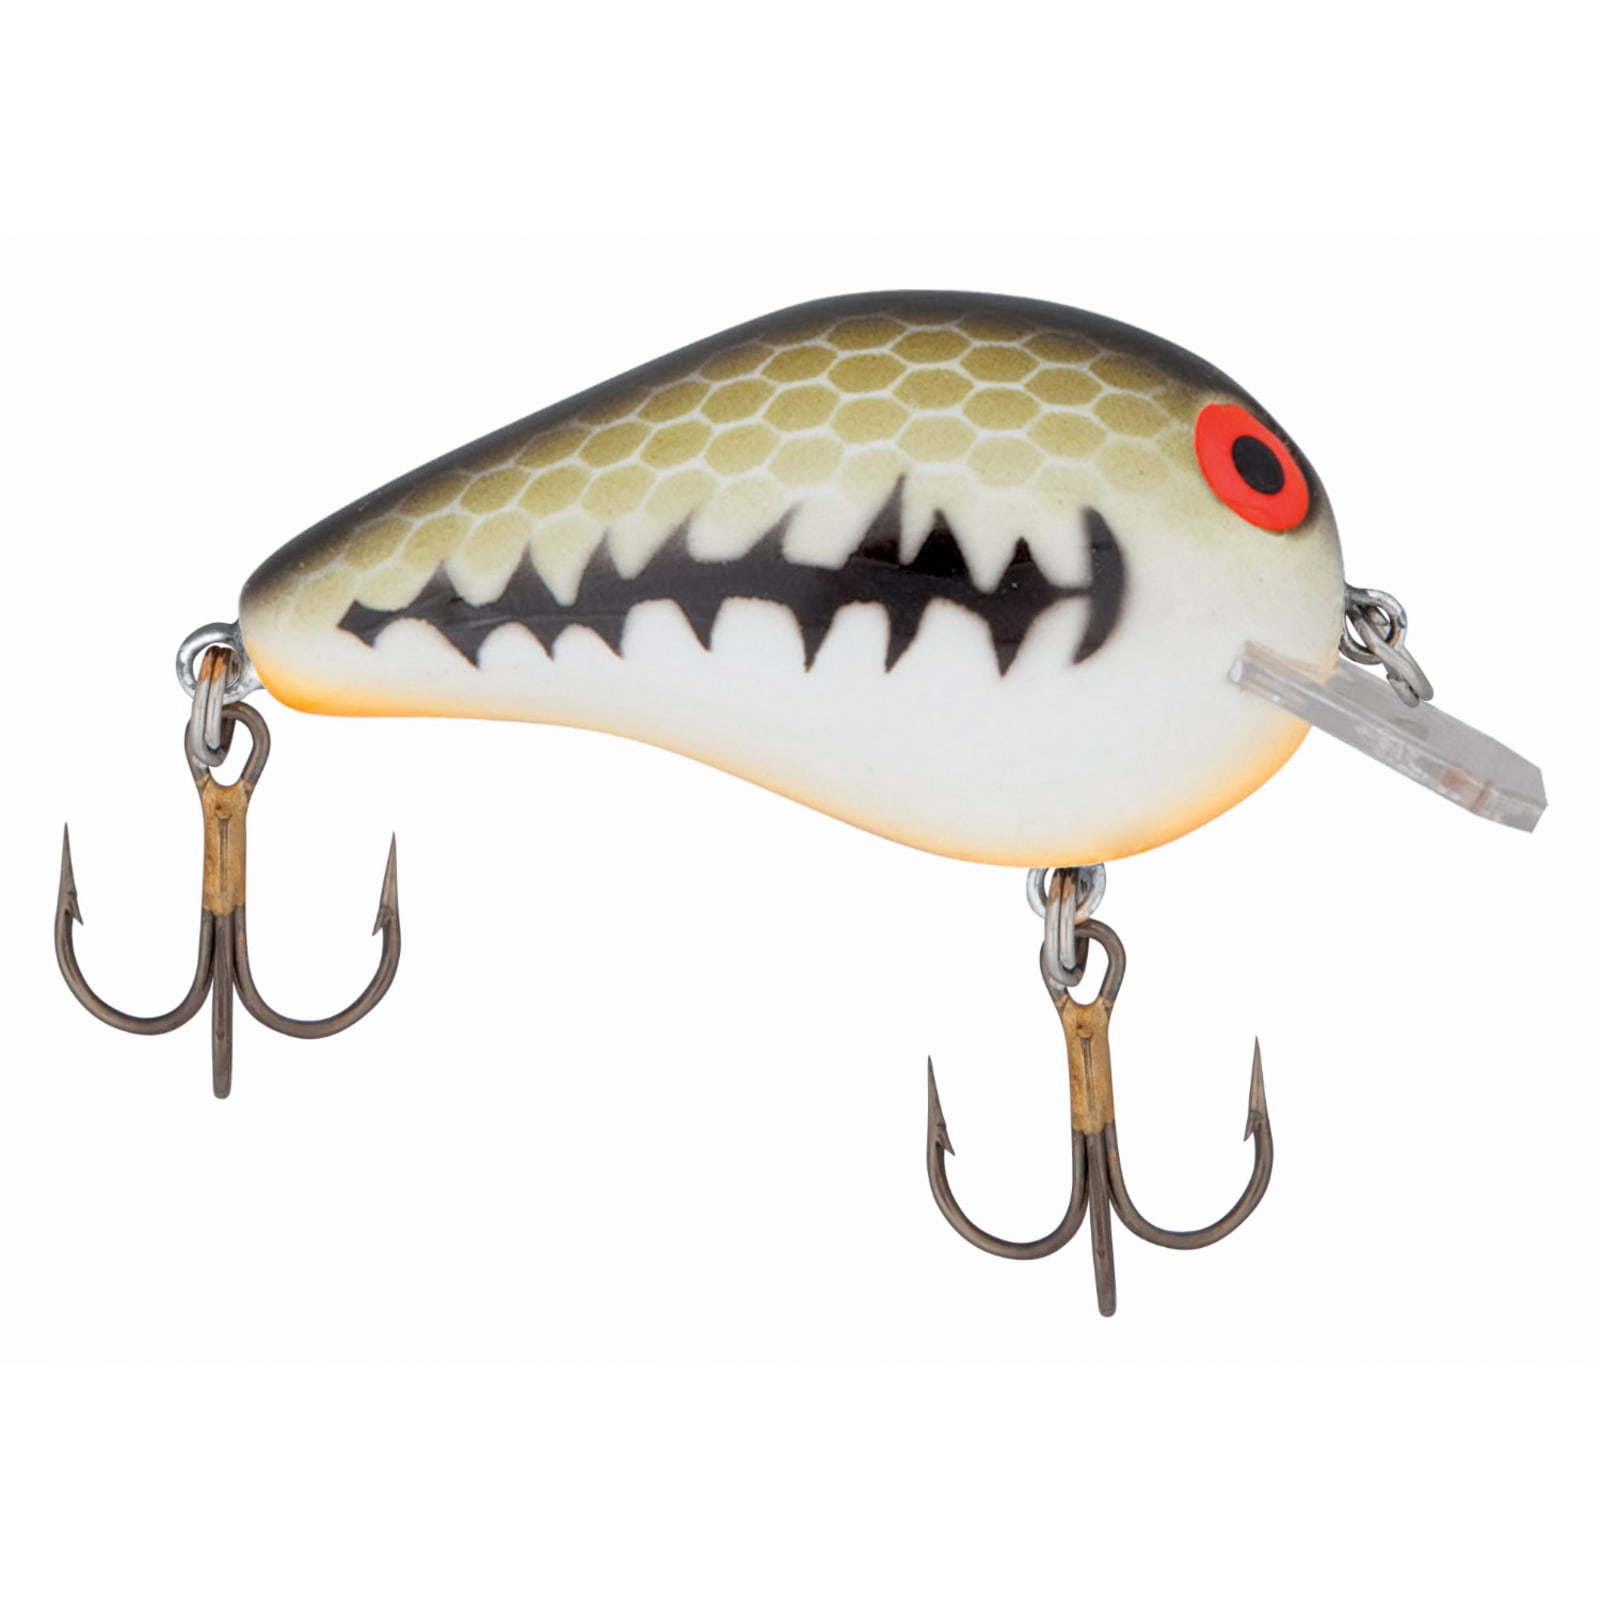 Bomber Square A Baby Bass Orange Belly 1/4oz